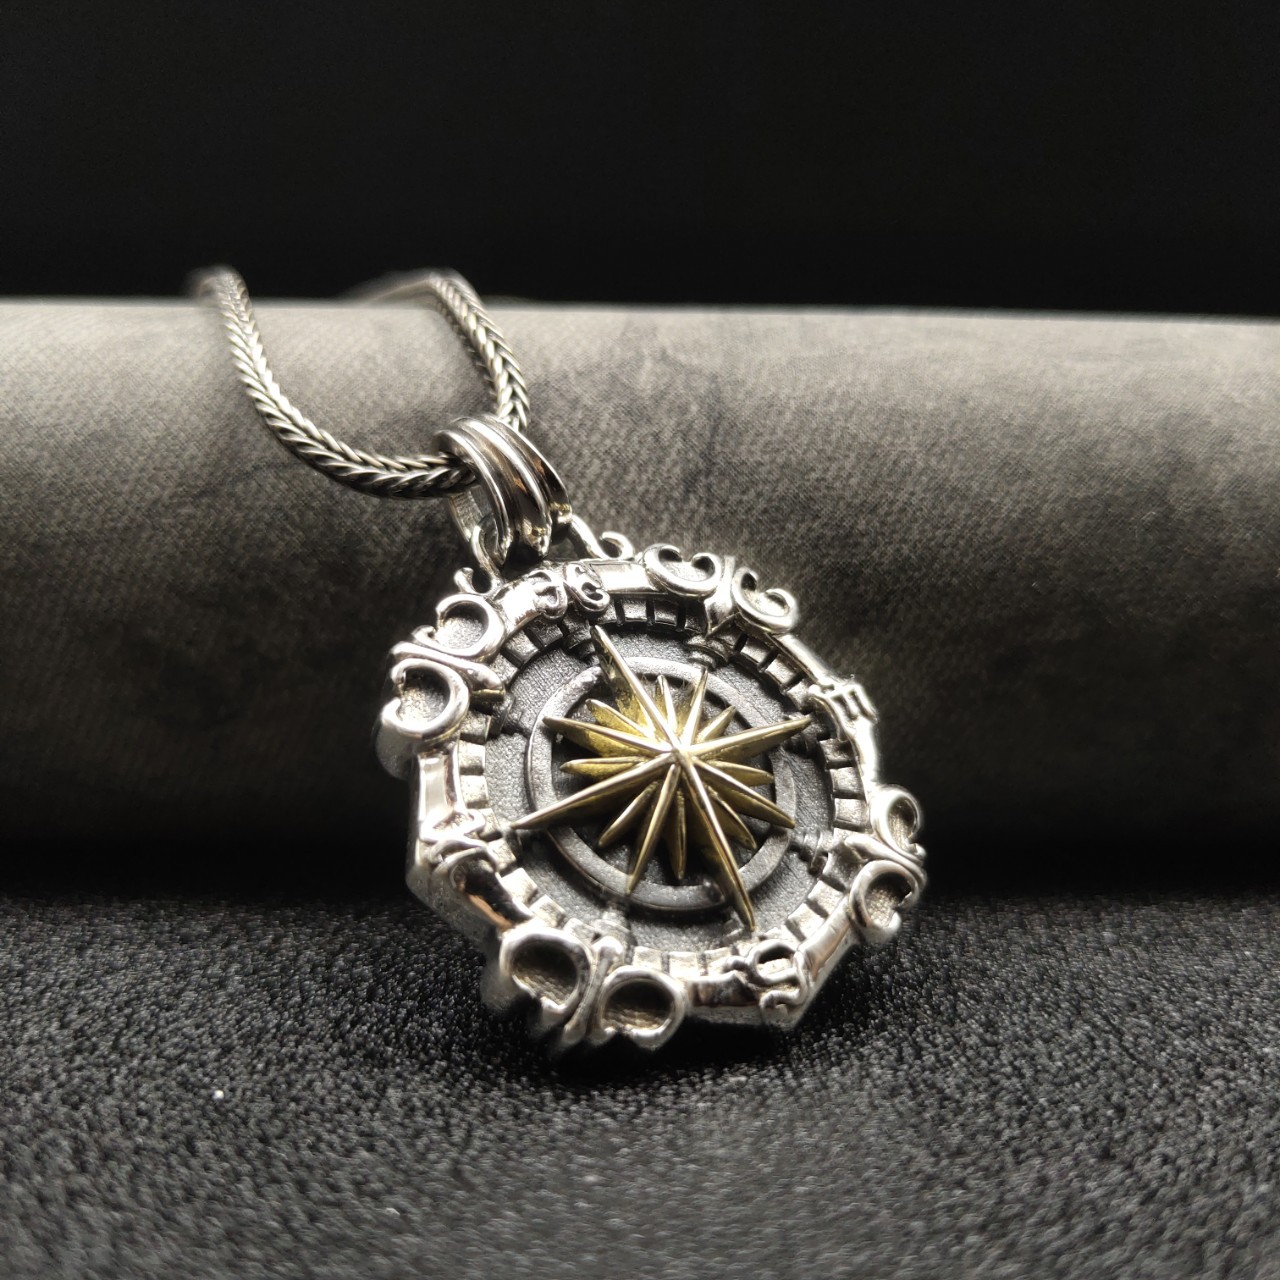 "Mens Silver Pendant - Free Shipping Available"